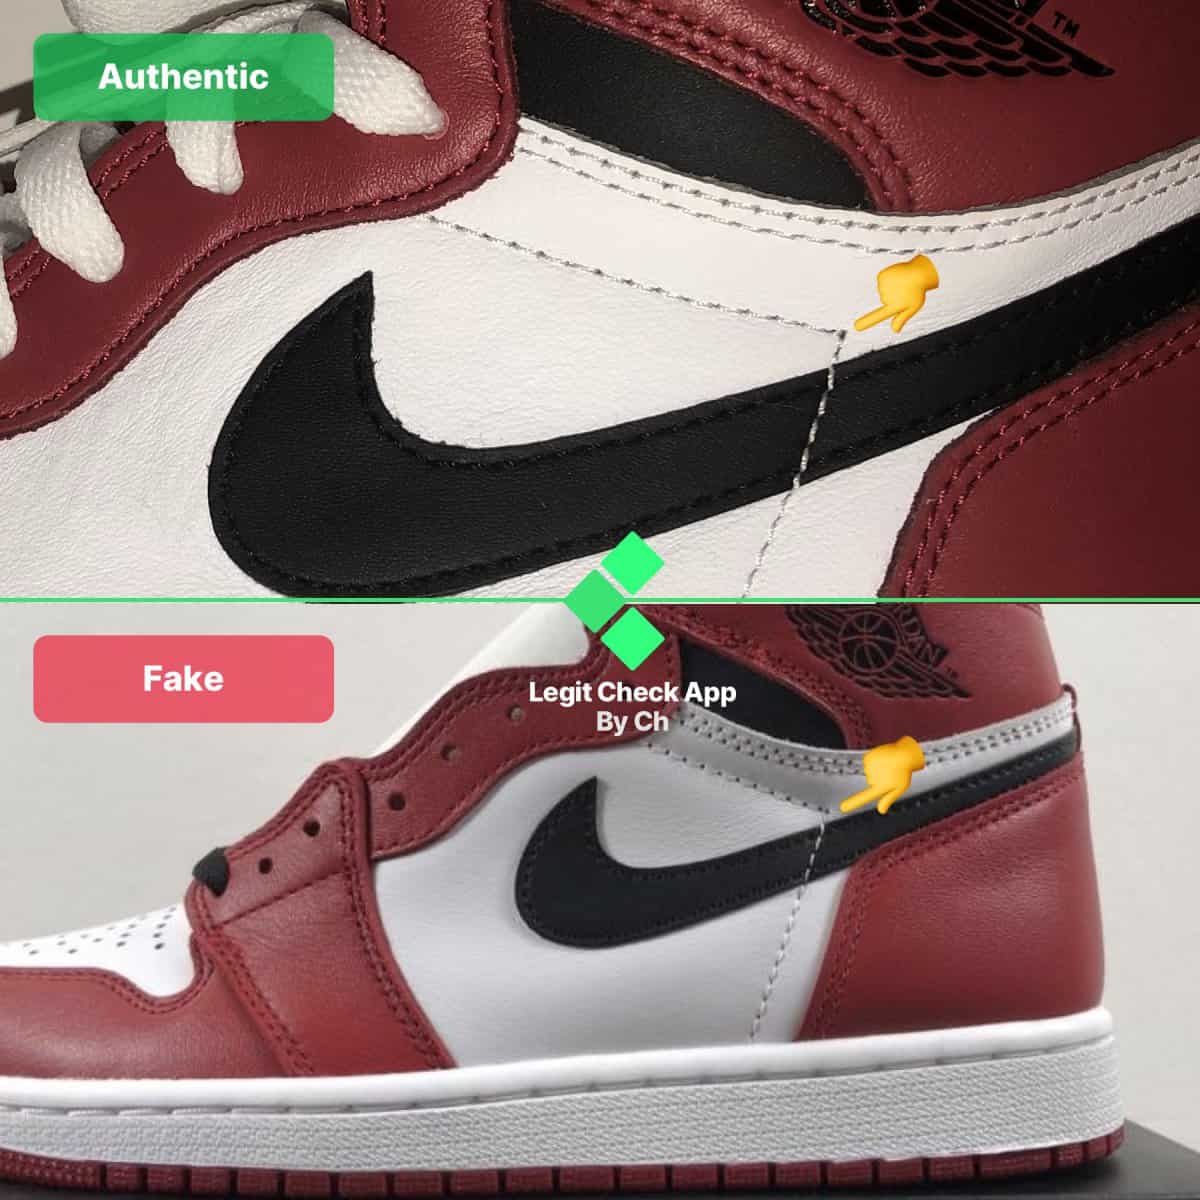 Fake Vs Real Air Jordan 1 Chicago (Newer Releases) - Legit Check By Ch